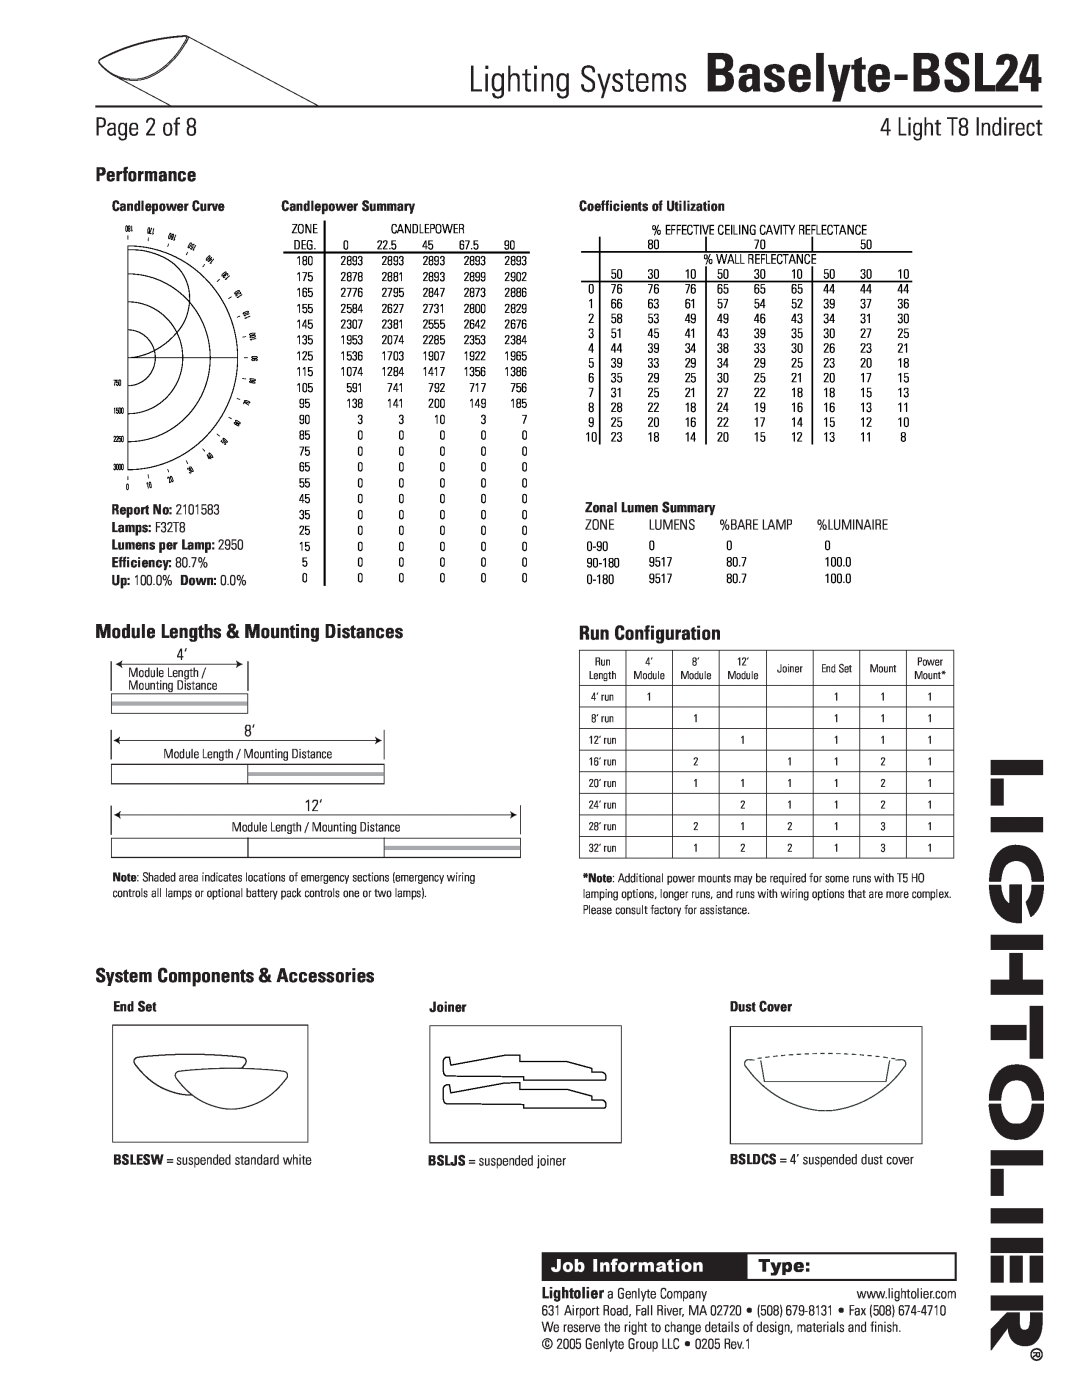 Lightolier Lighting Systems Baselyte-BSL24, Module Lengths & Mounting Distances, Run Configuration, Type, Performance 